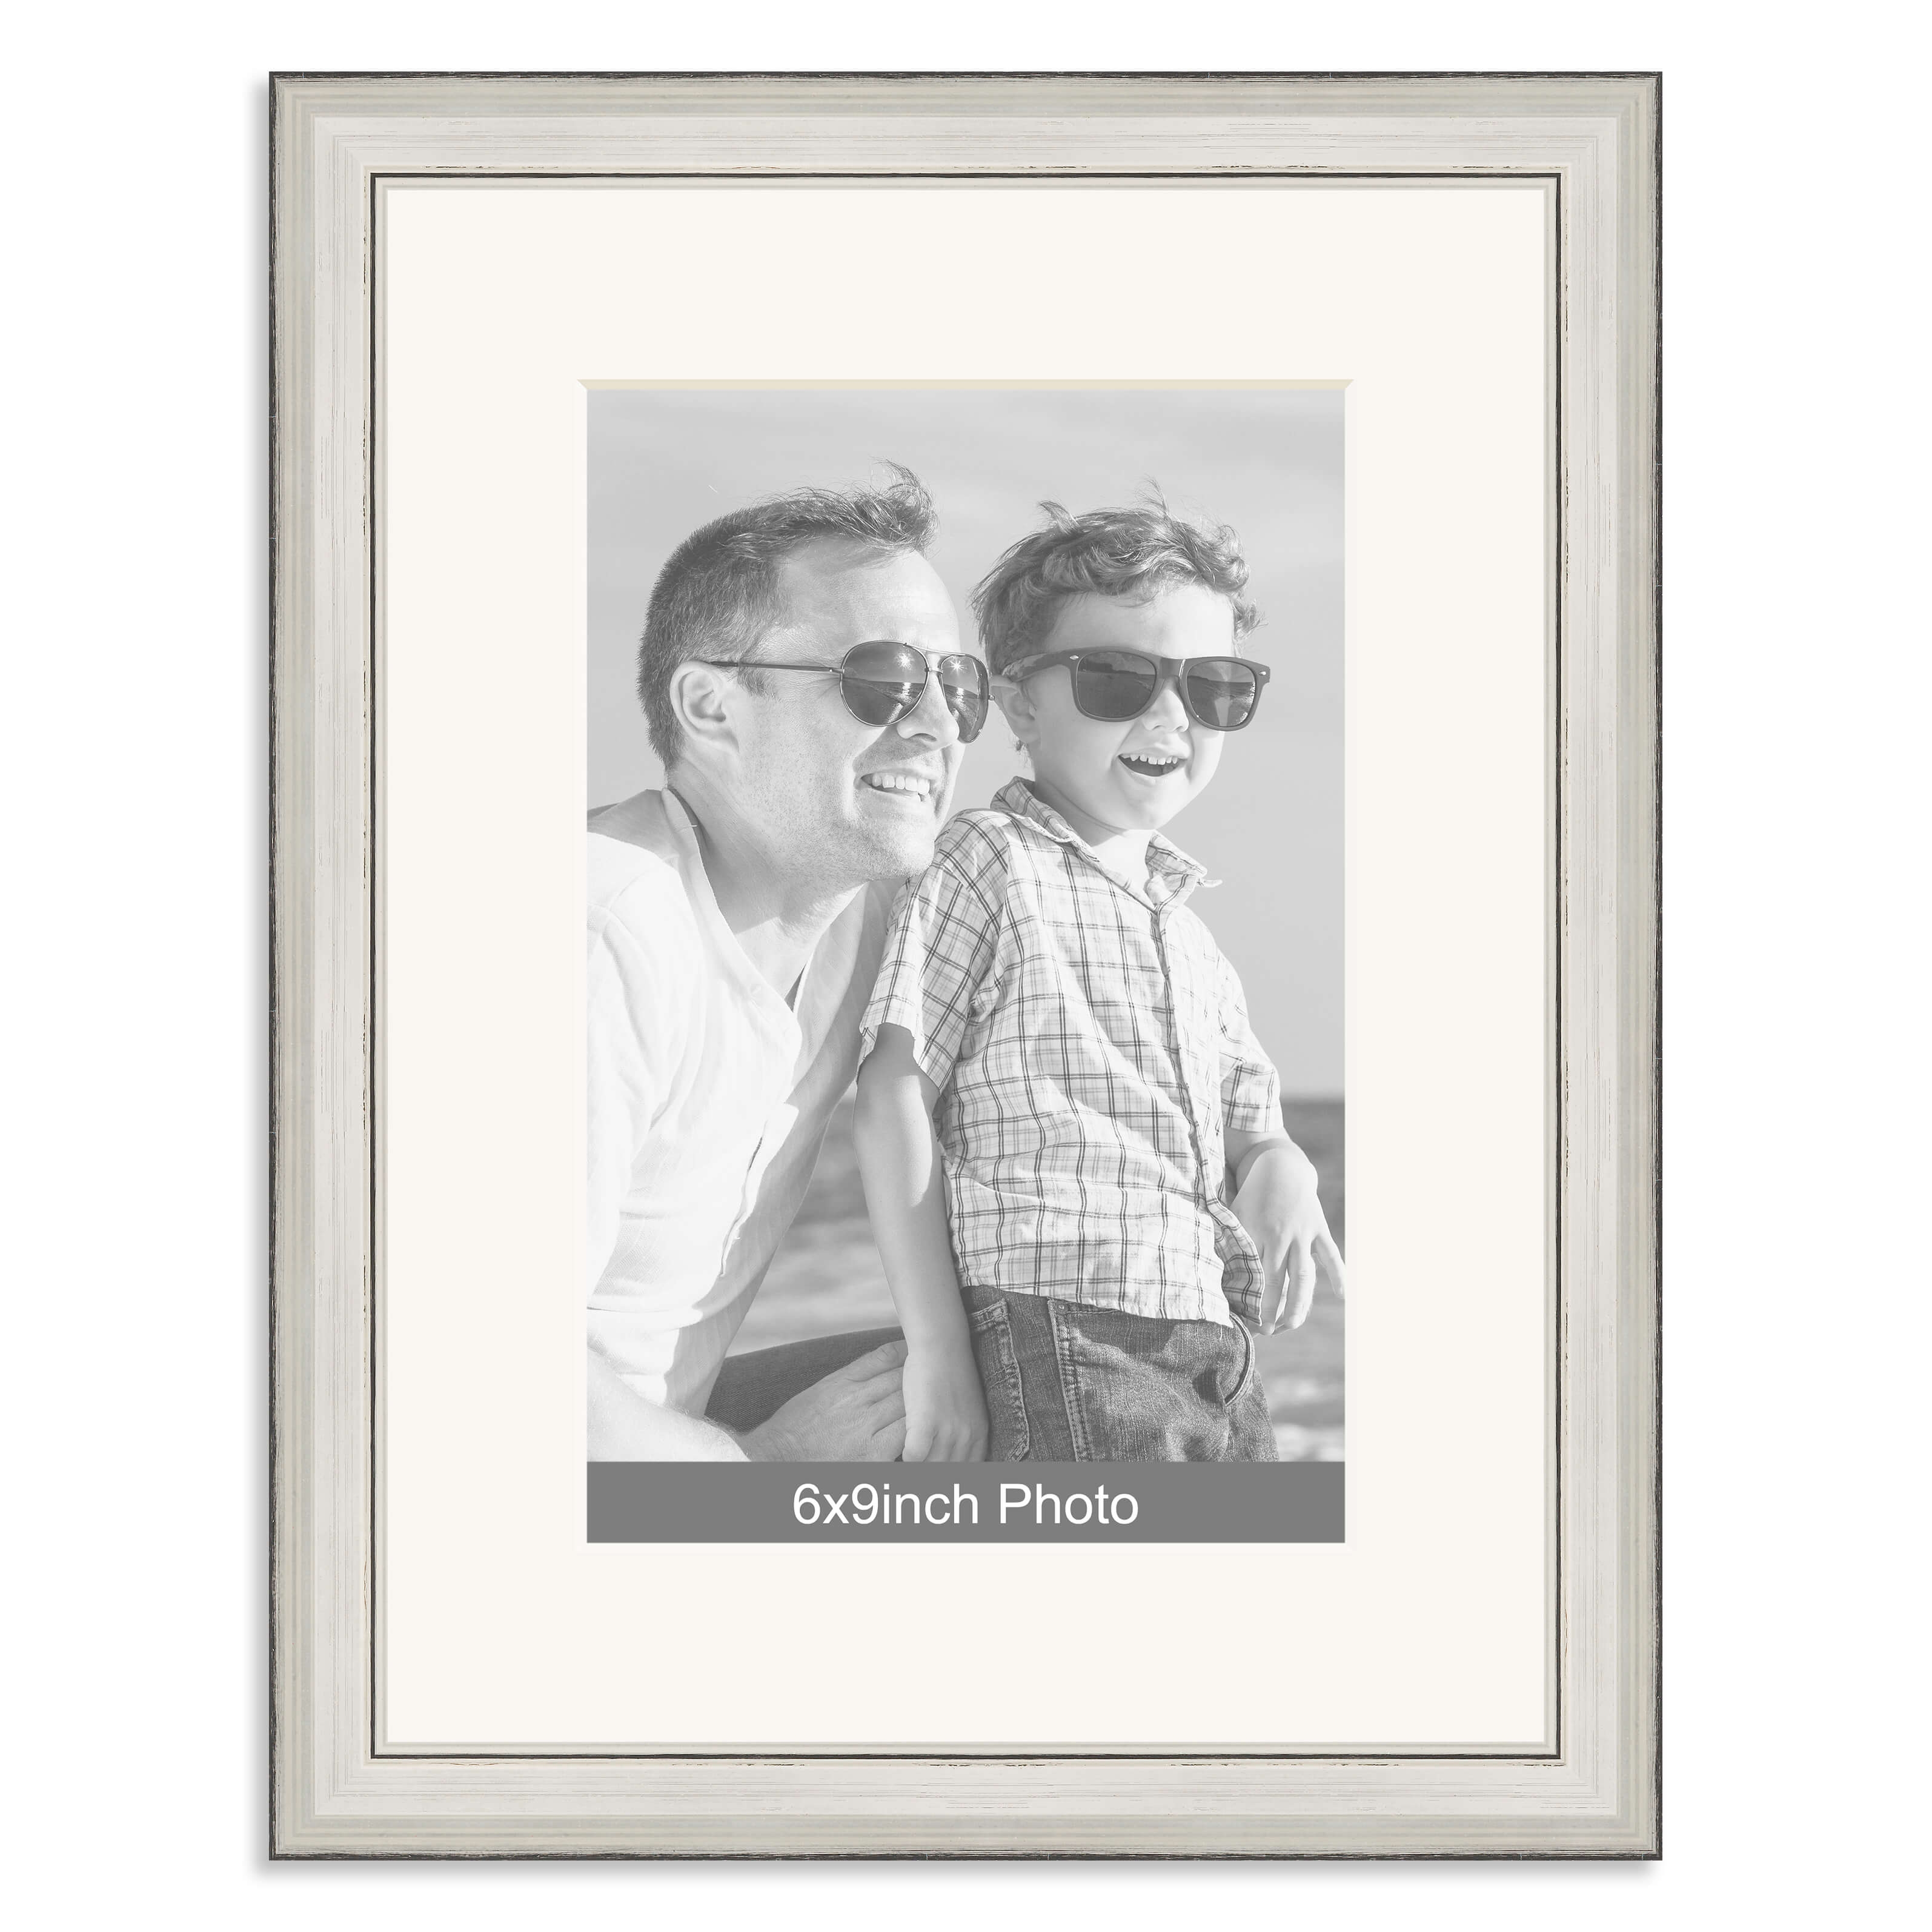 Silver Wooden Photo Frame with mount for a 9×6/6x9in Photo – Photo to follow by email